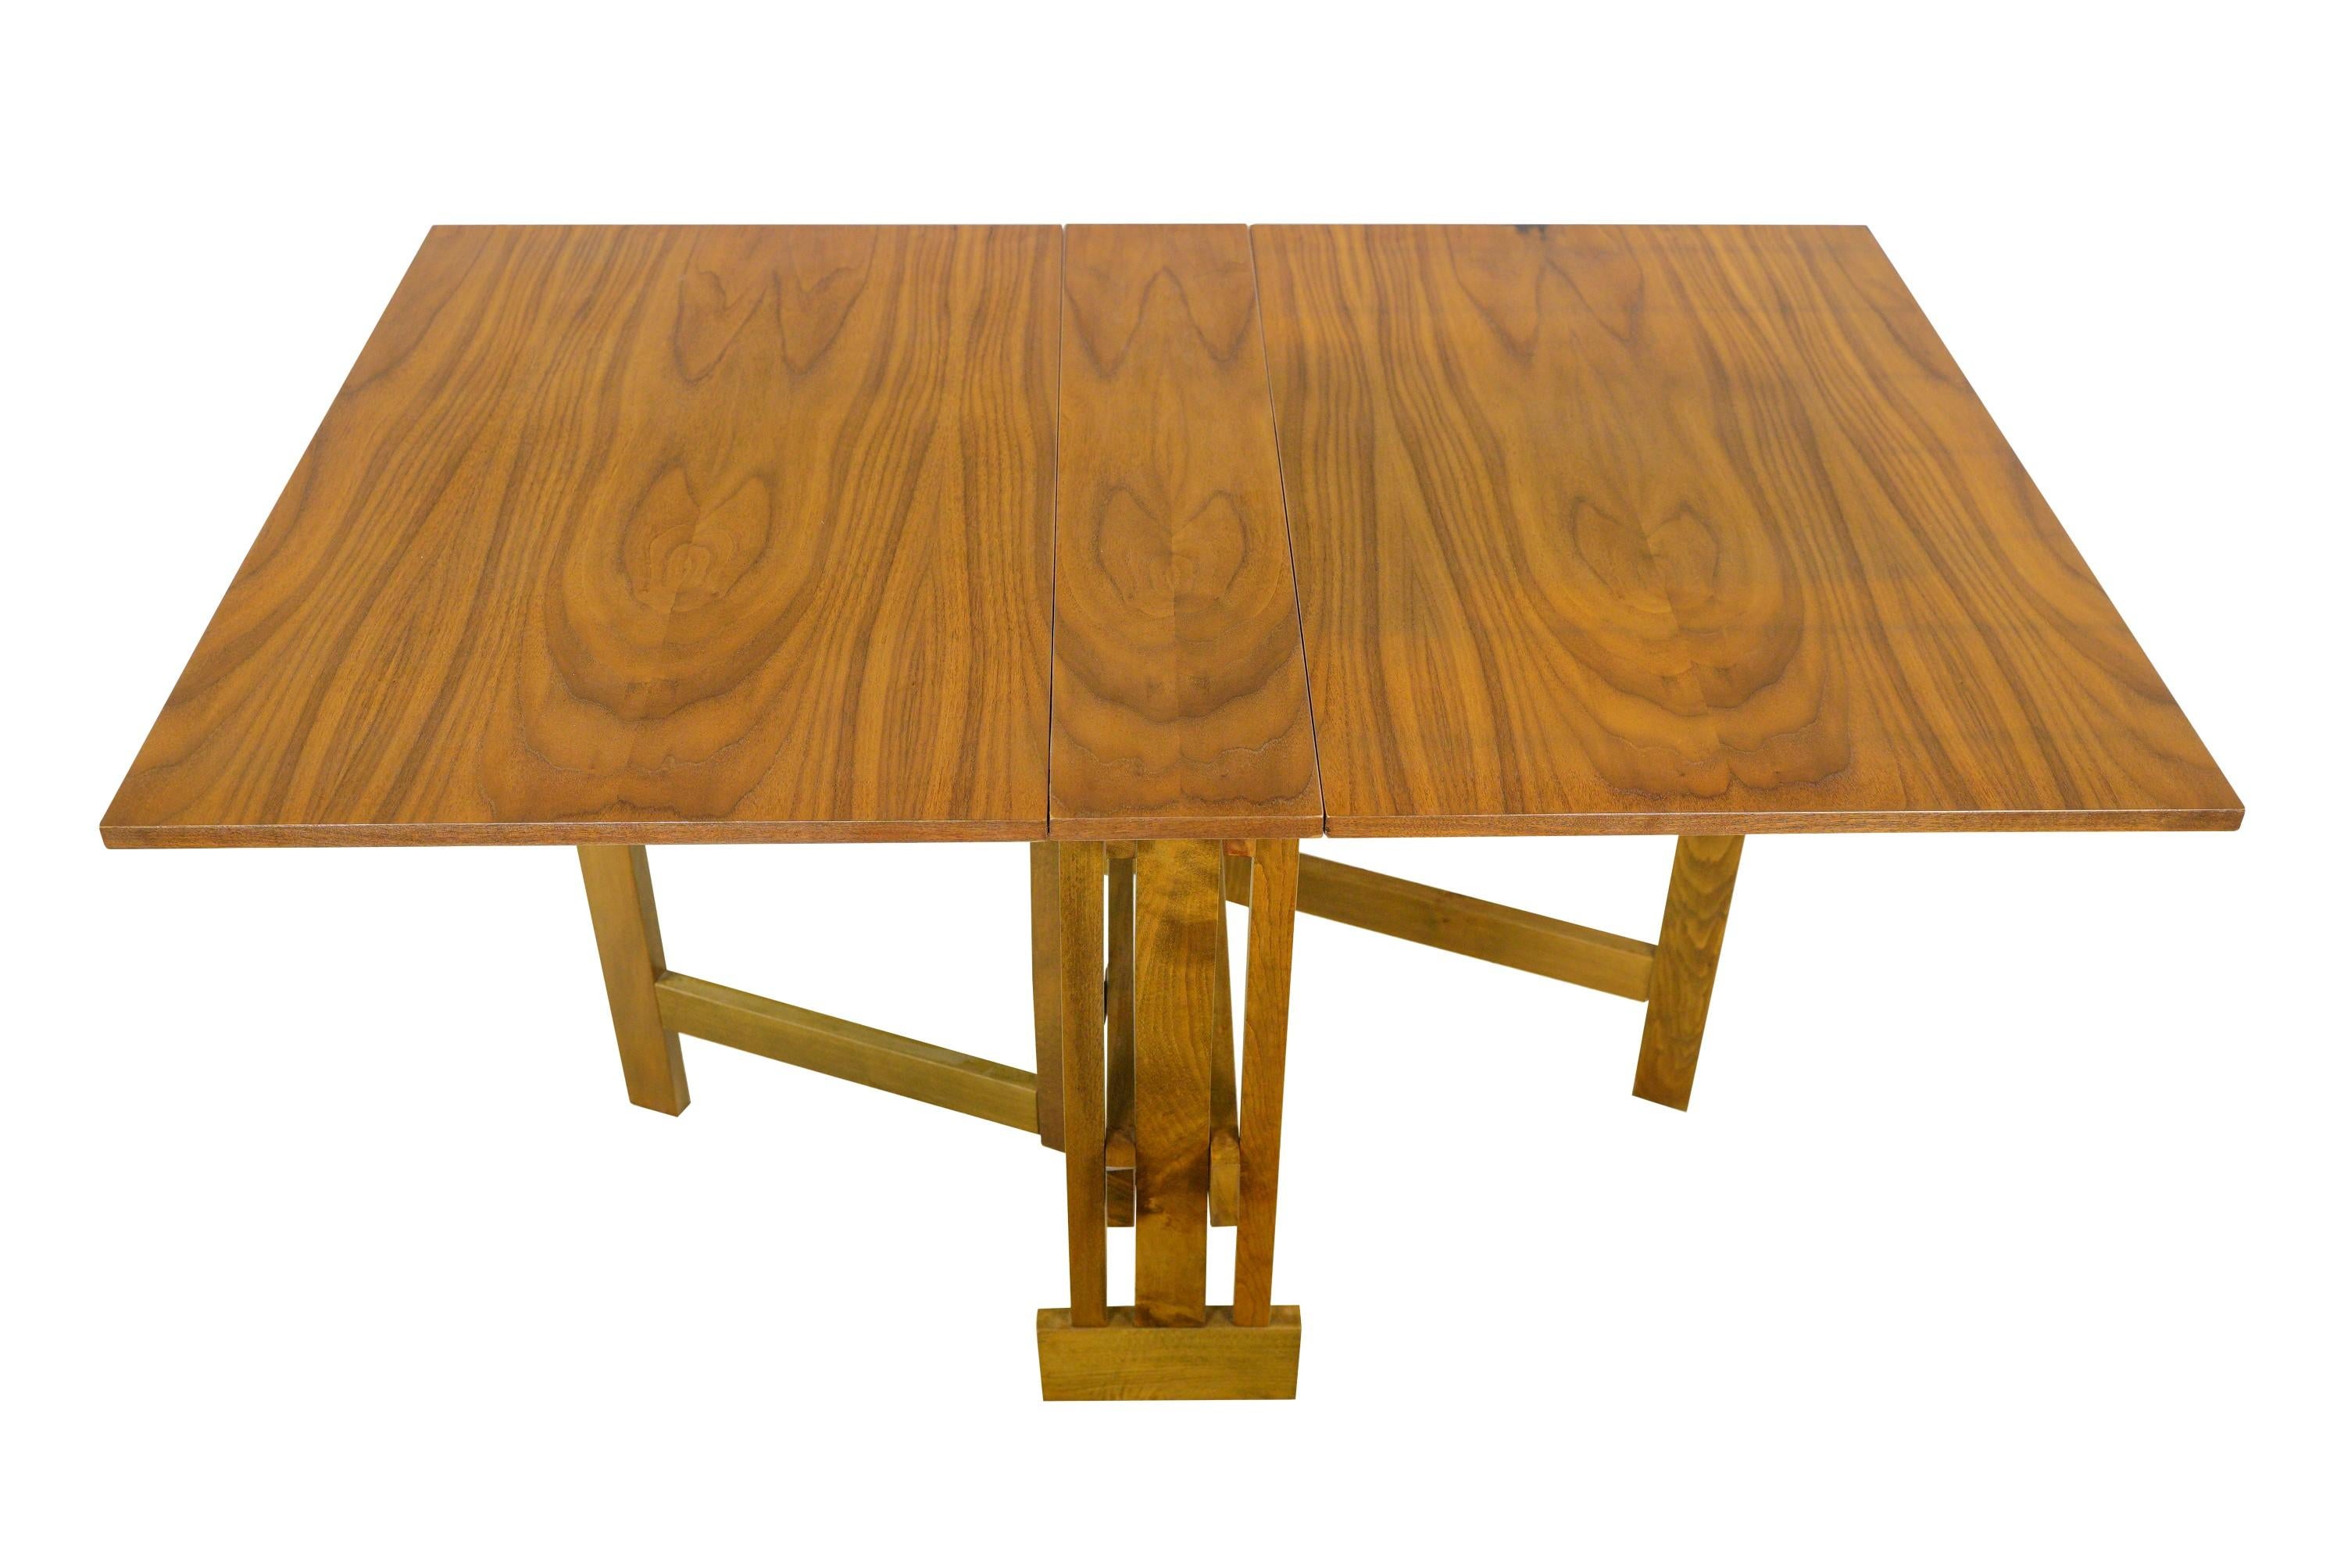 This restored maple drop leaf dining table, ingeniously designed with foldable leaves, allows for versatile seating arrangements and efficient space utilization. Its refinishing enhances its aesthetic appeal and functionality, making it an ideal